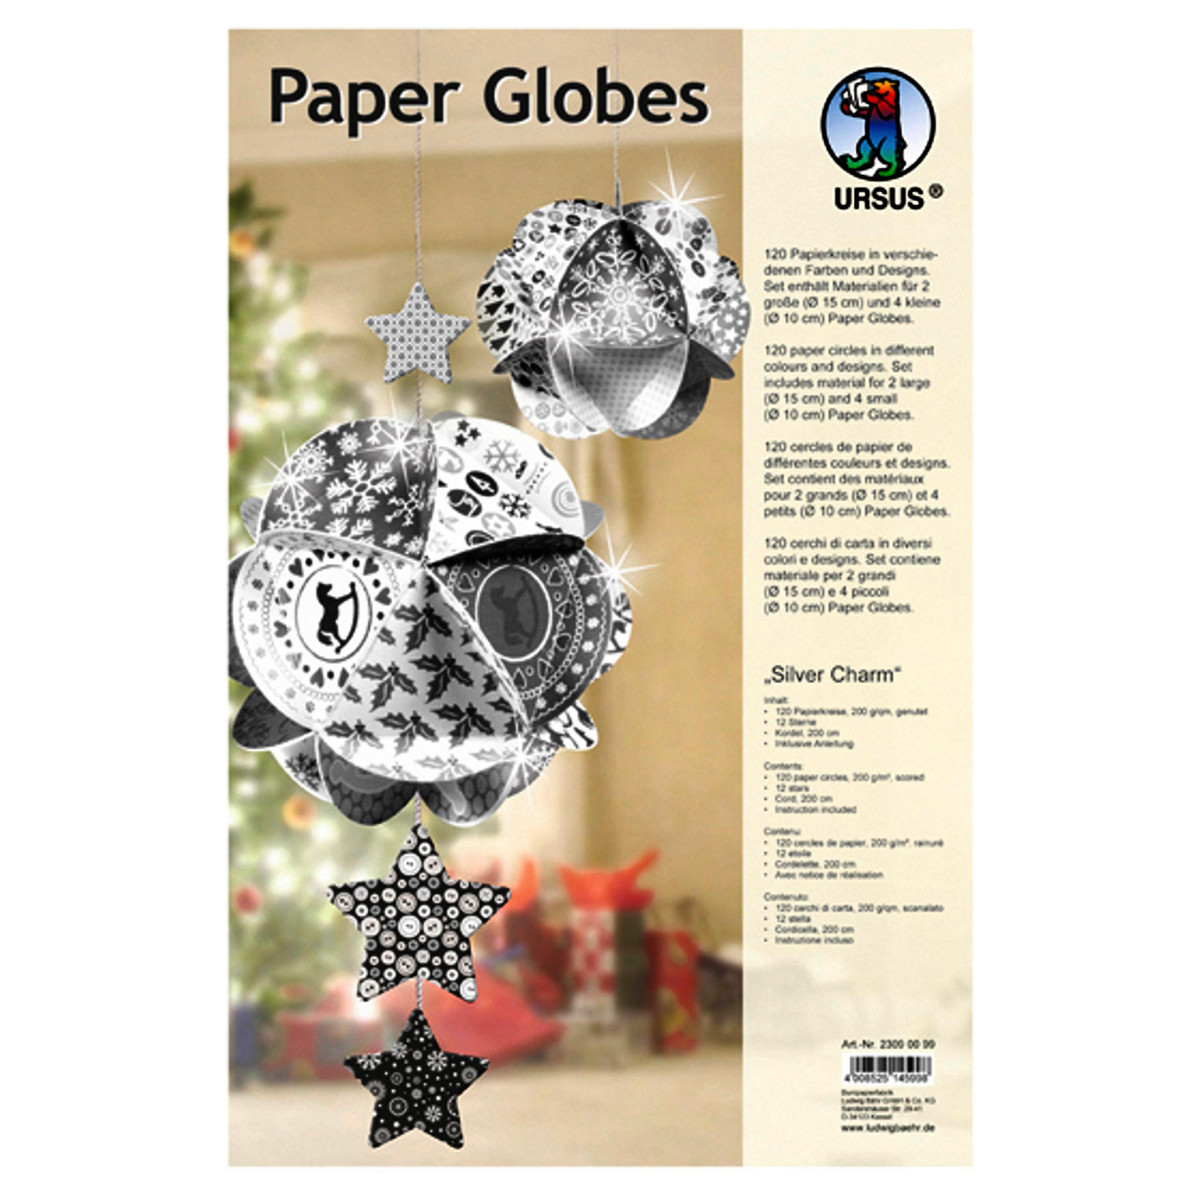 Paper Globes "Silver Charm"